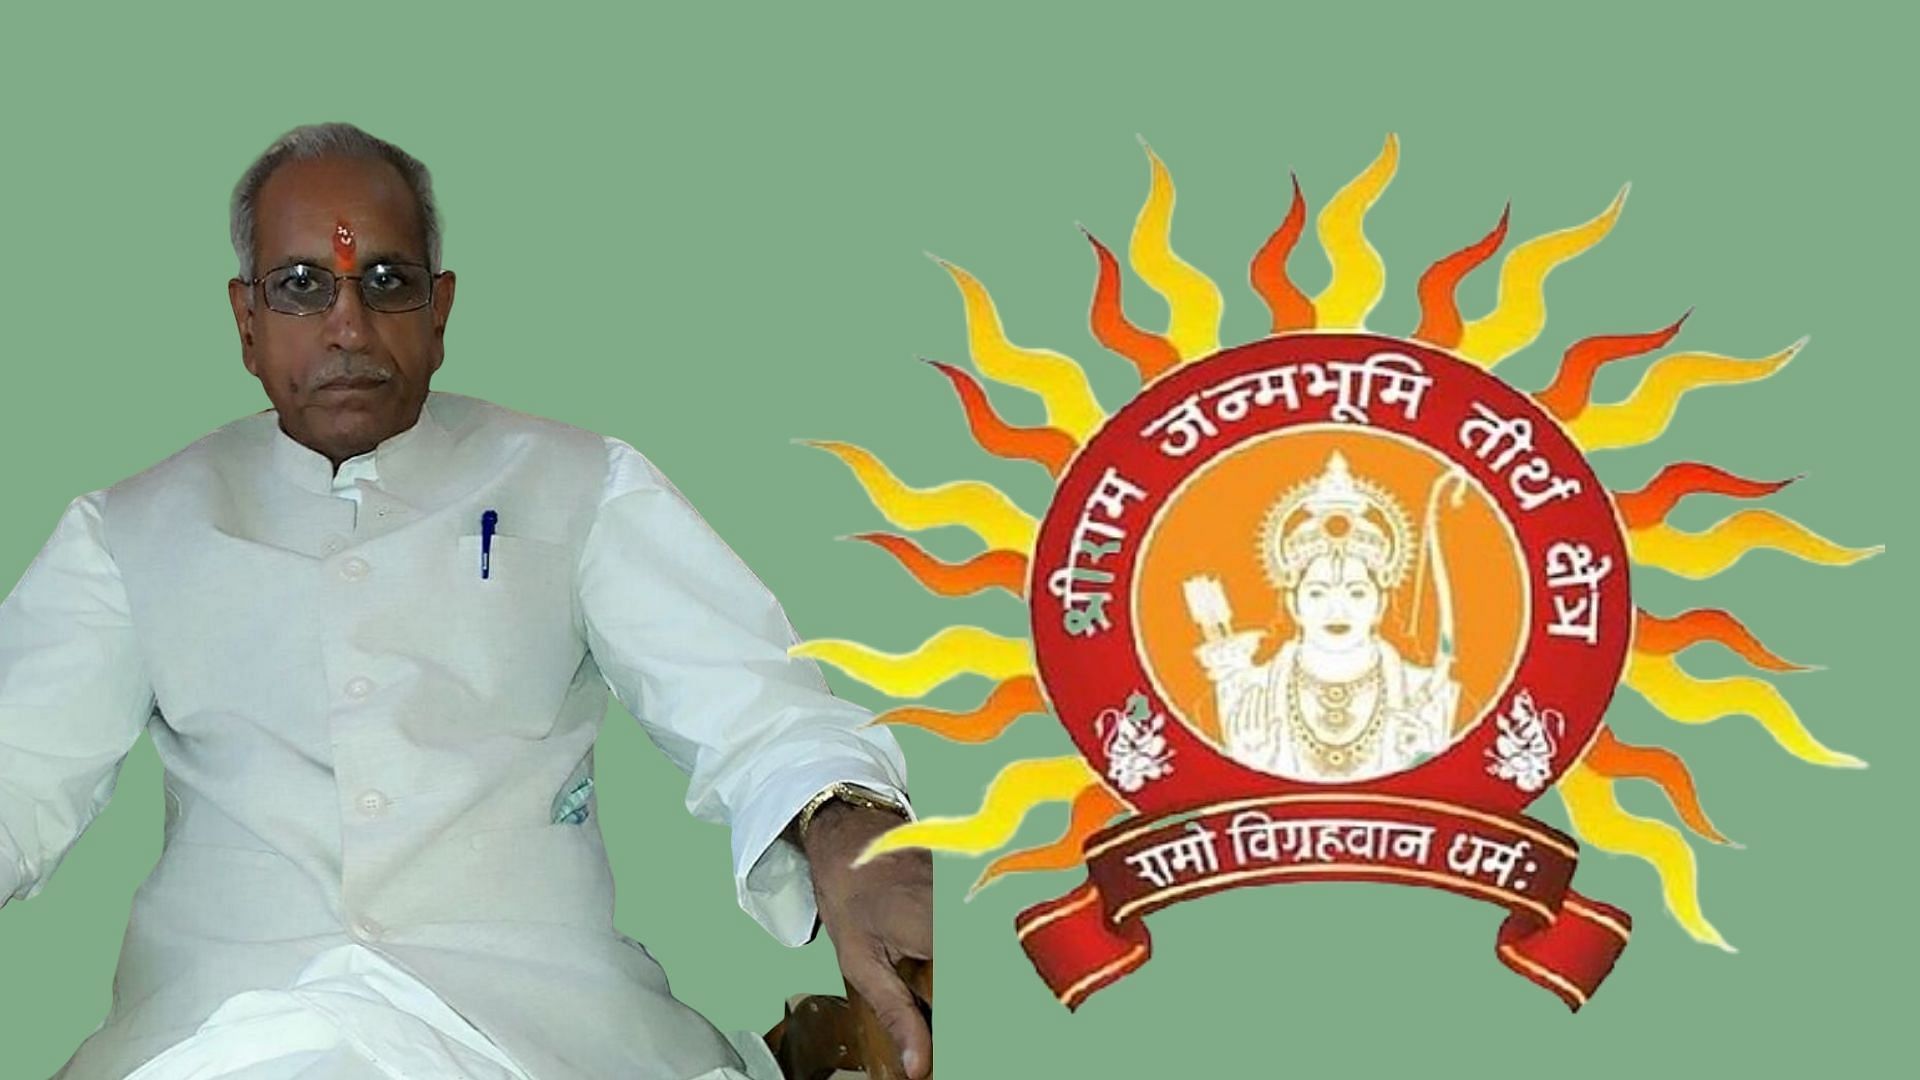 Champat Rai is senior VHP leader and general secretary of the  Shree Ram Janmabhoomi Teertha Kshetra Trust and on the right is the logo of the trust that was unveiled recently.